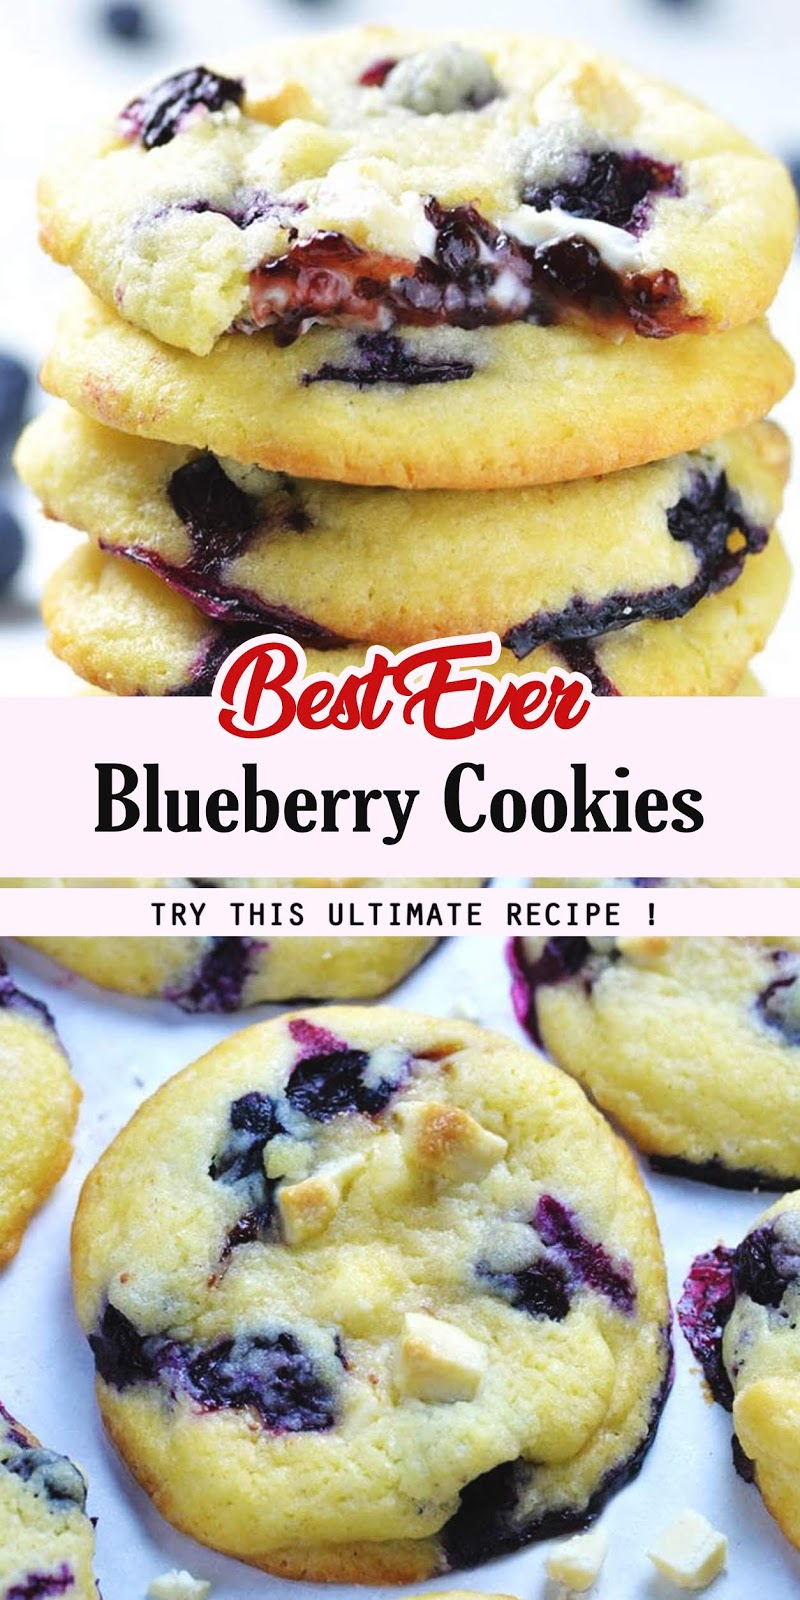 Best Ever Blueberry Cookies - 3 SECONDS